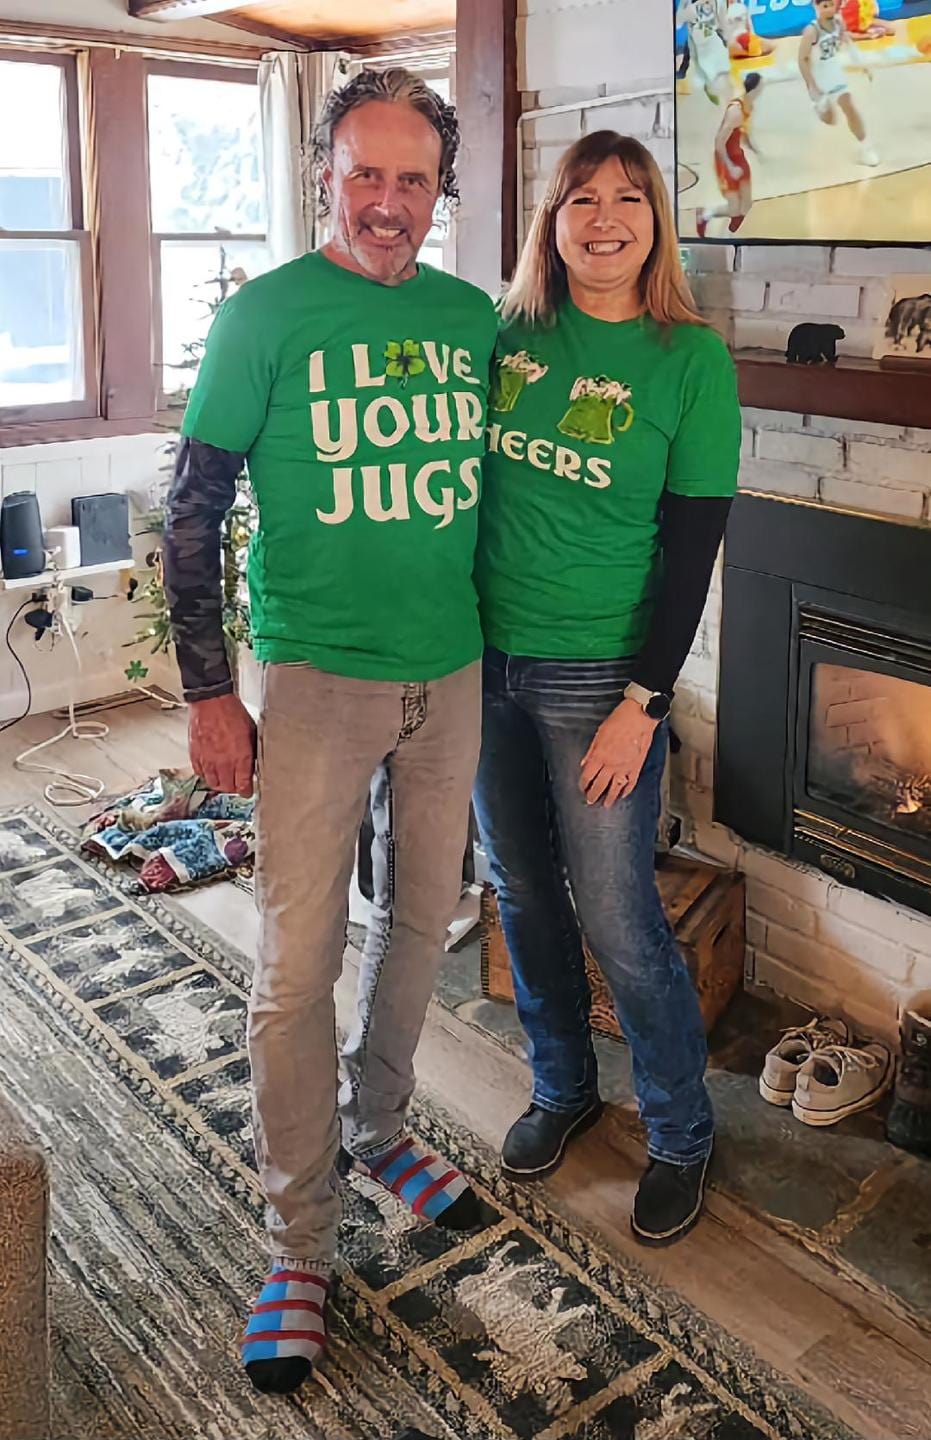 I Love Your Jugs & Cheers - St Patrick's Day Couples Drinking Shirts